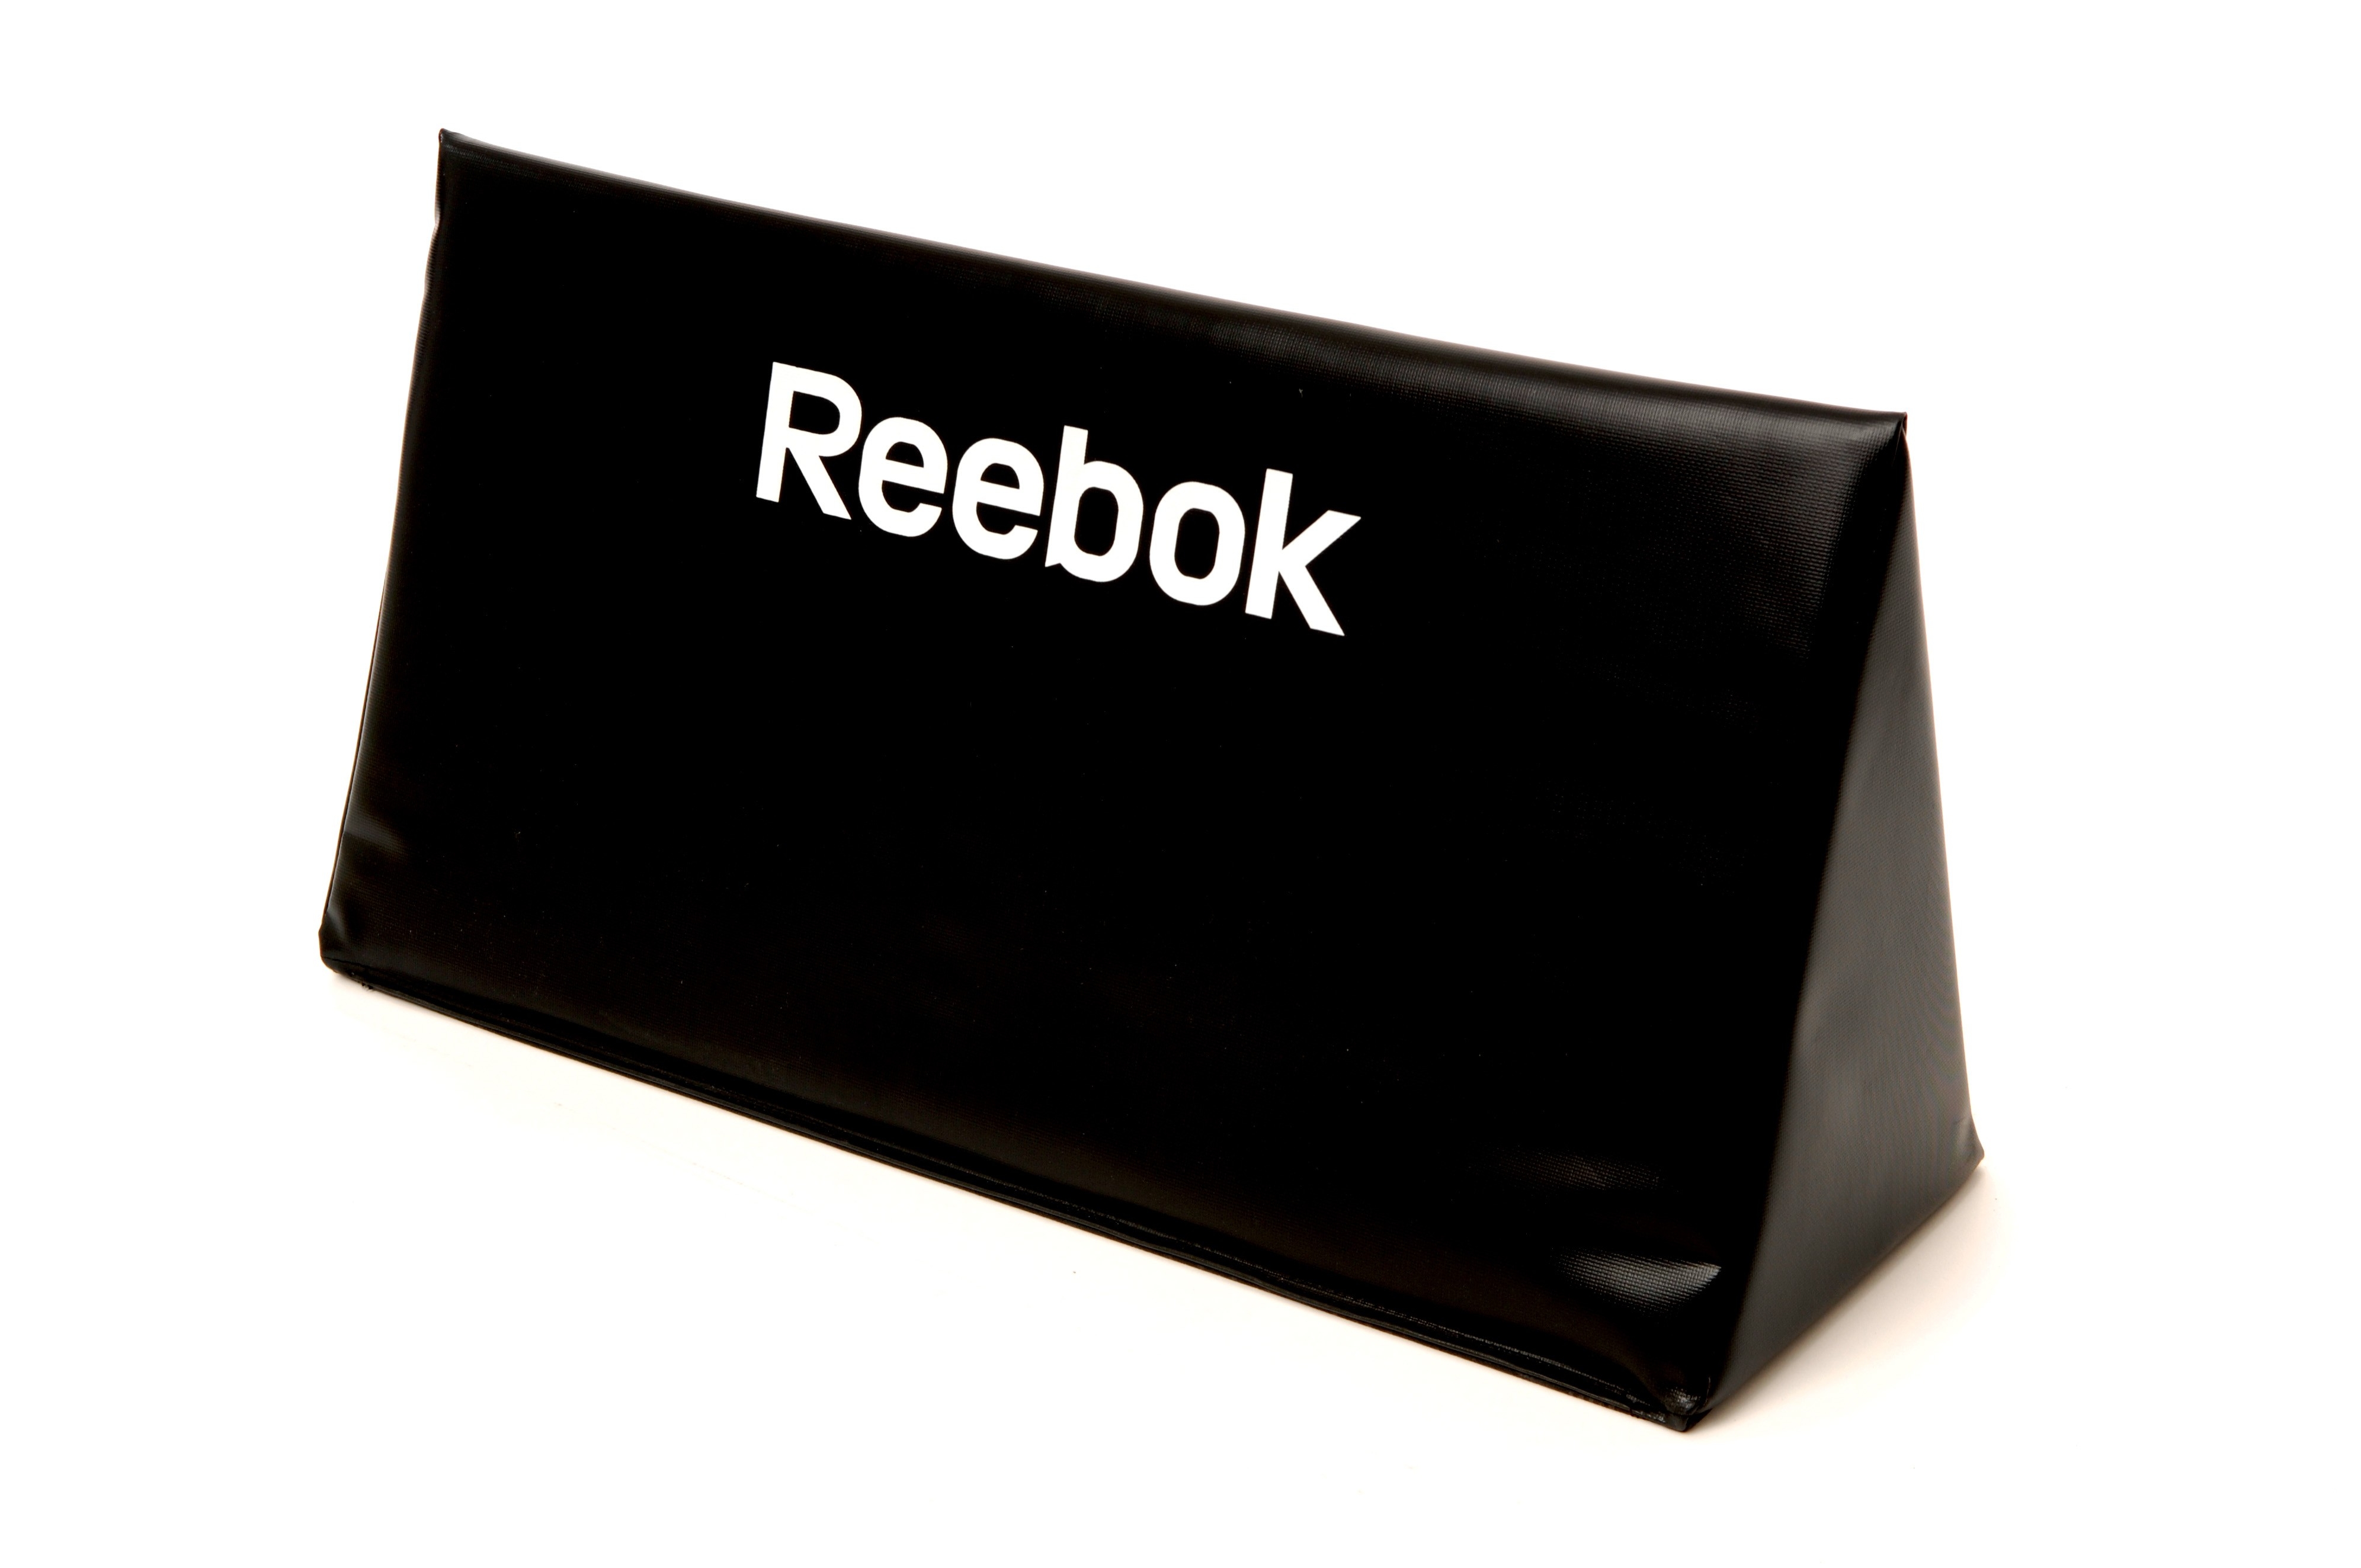 Reebok Hd Wallpapers And Backgrounds